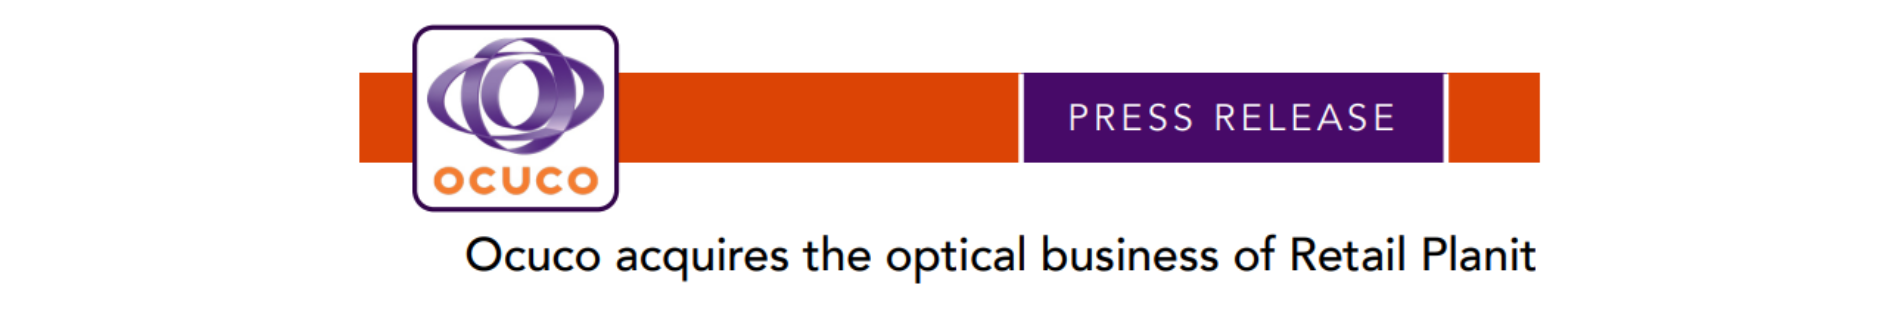 Ocuco Acquires the Optical Business of Retail Planit